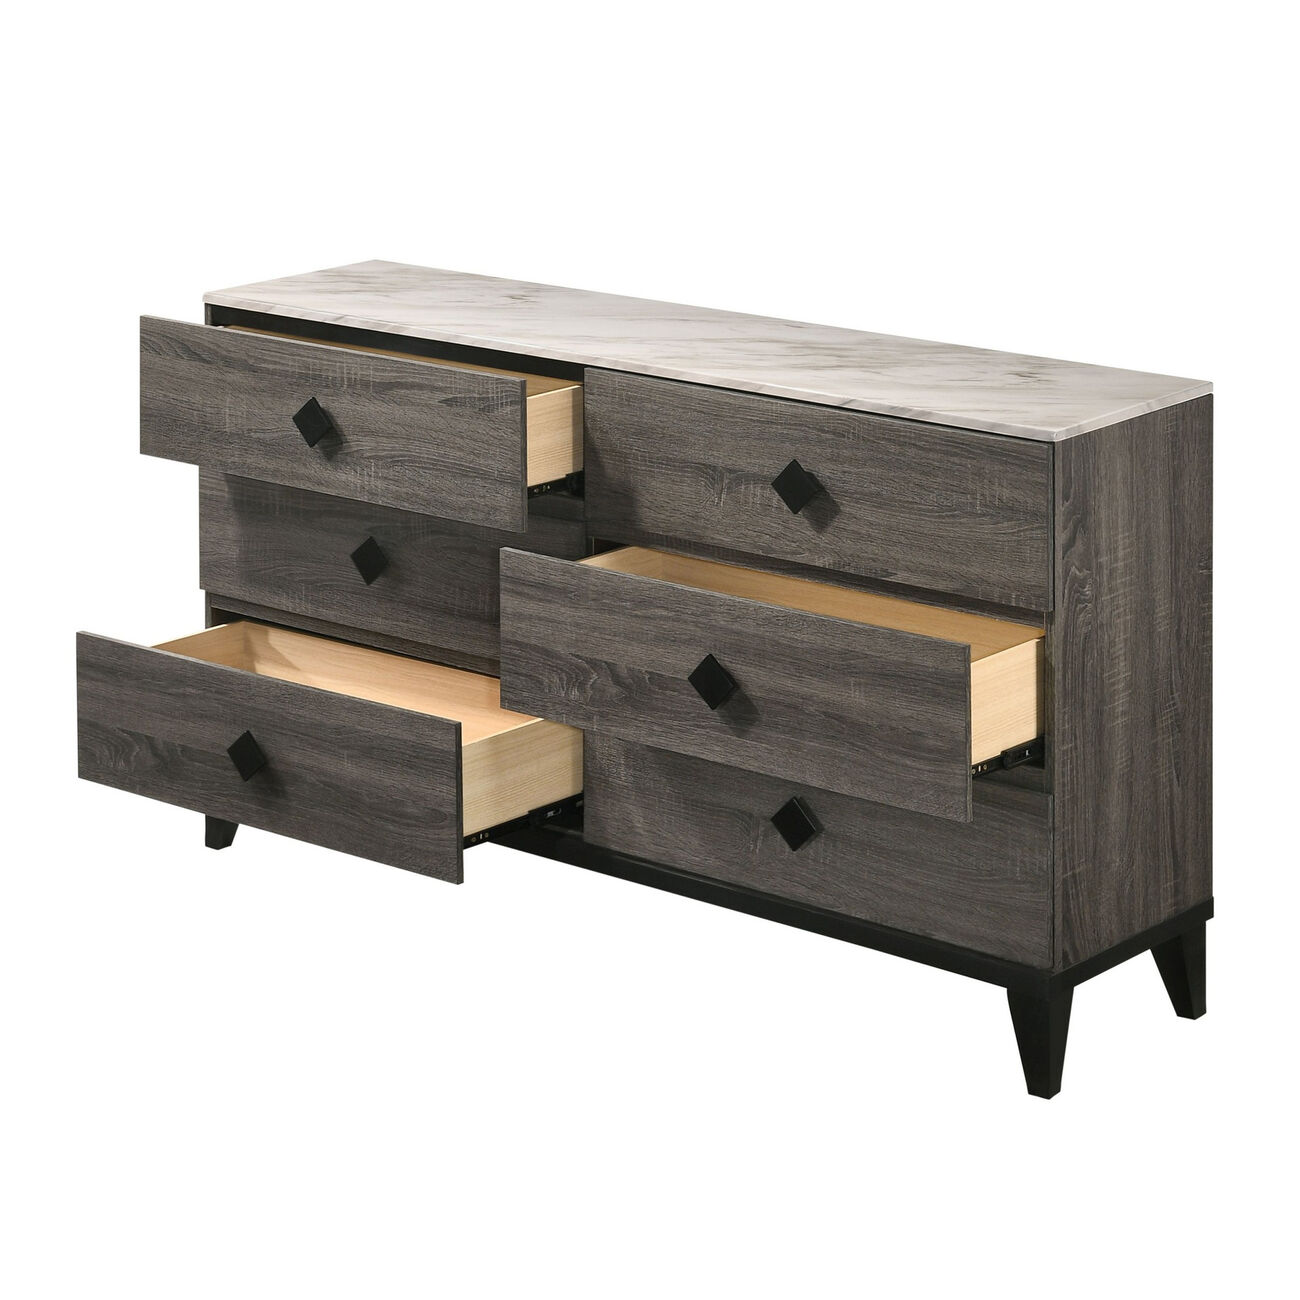 6 Drawer Wooden Dresser with Diamond Metal Knobs, Gray and Black